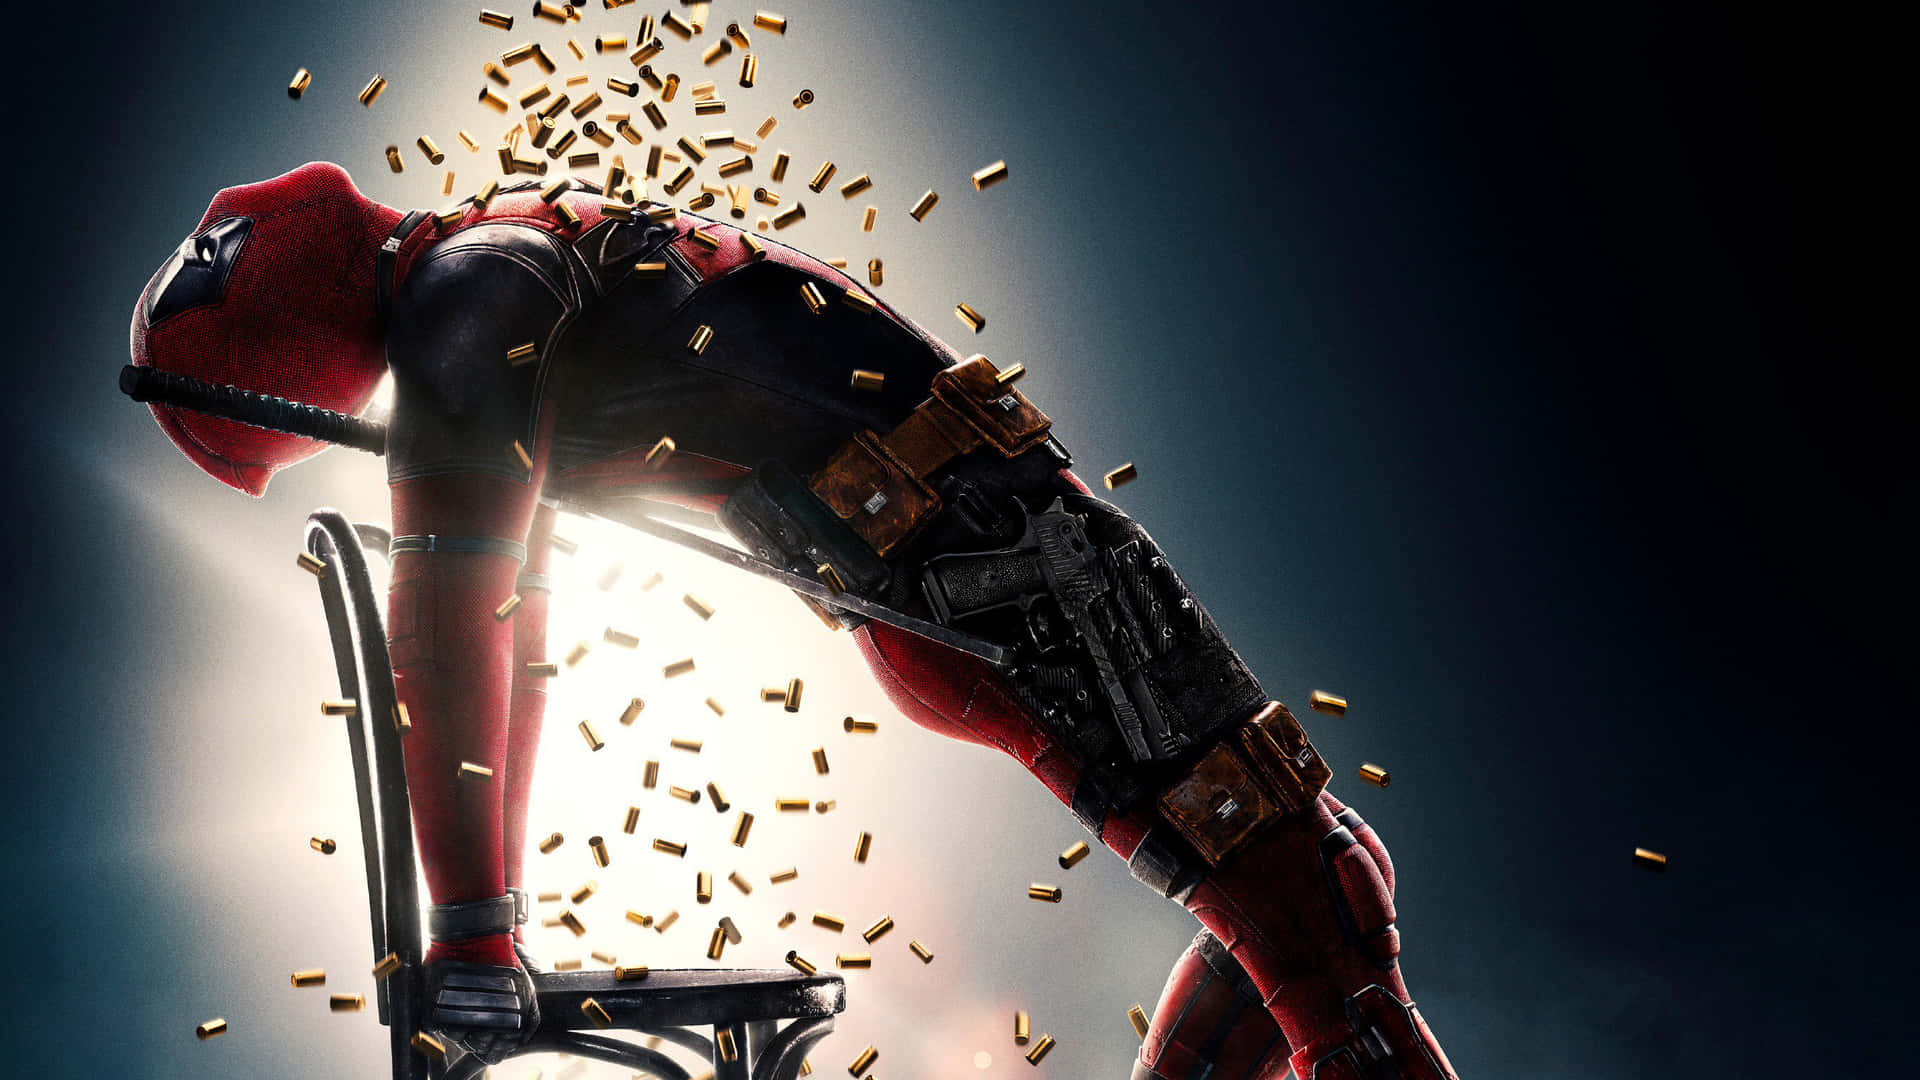 Deadpool Background Leaning And Being Showered With Bullet Shells